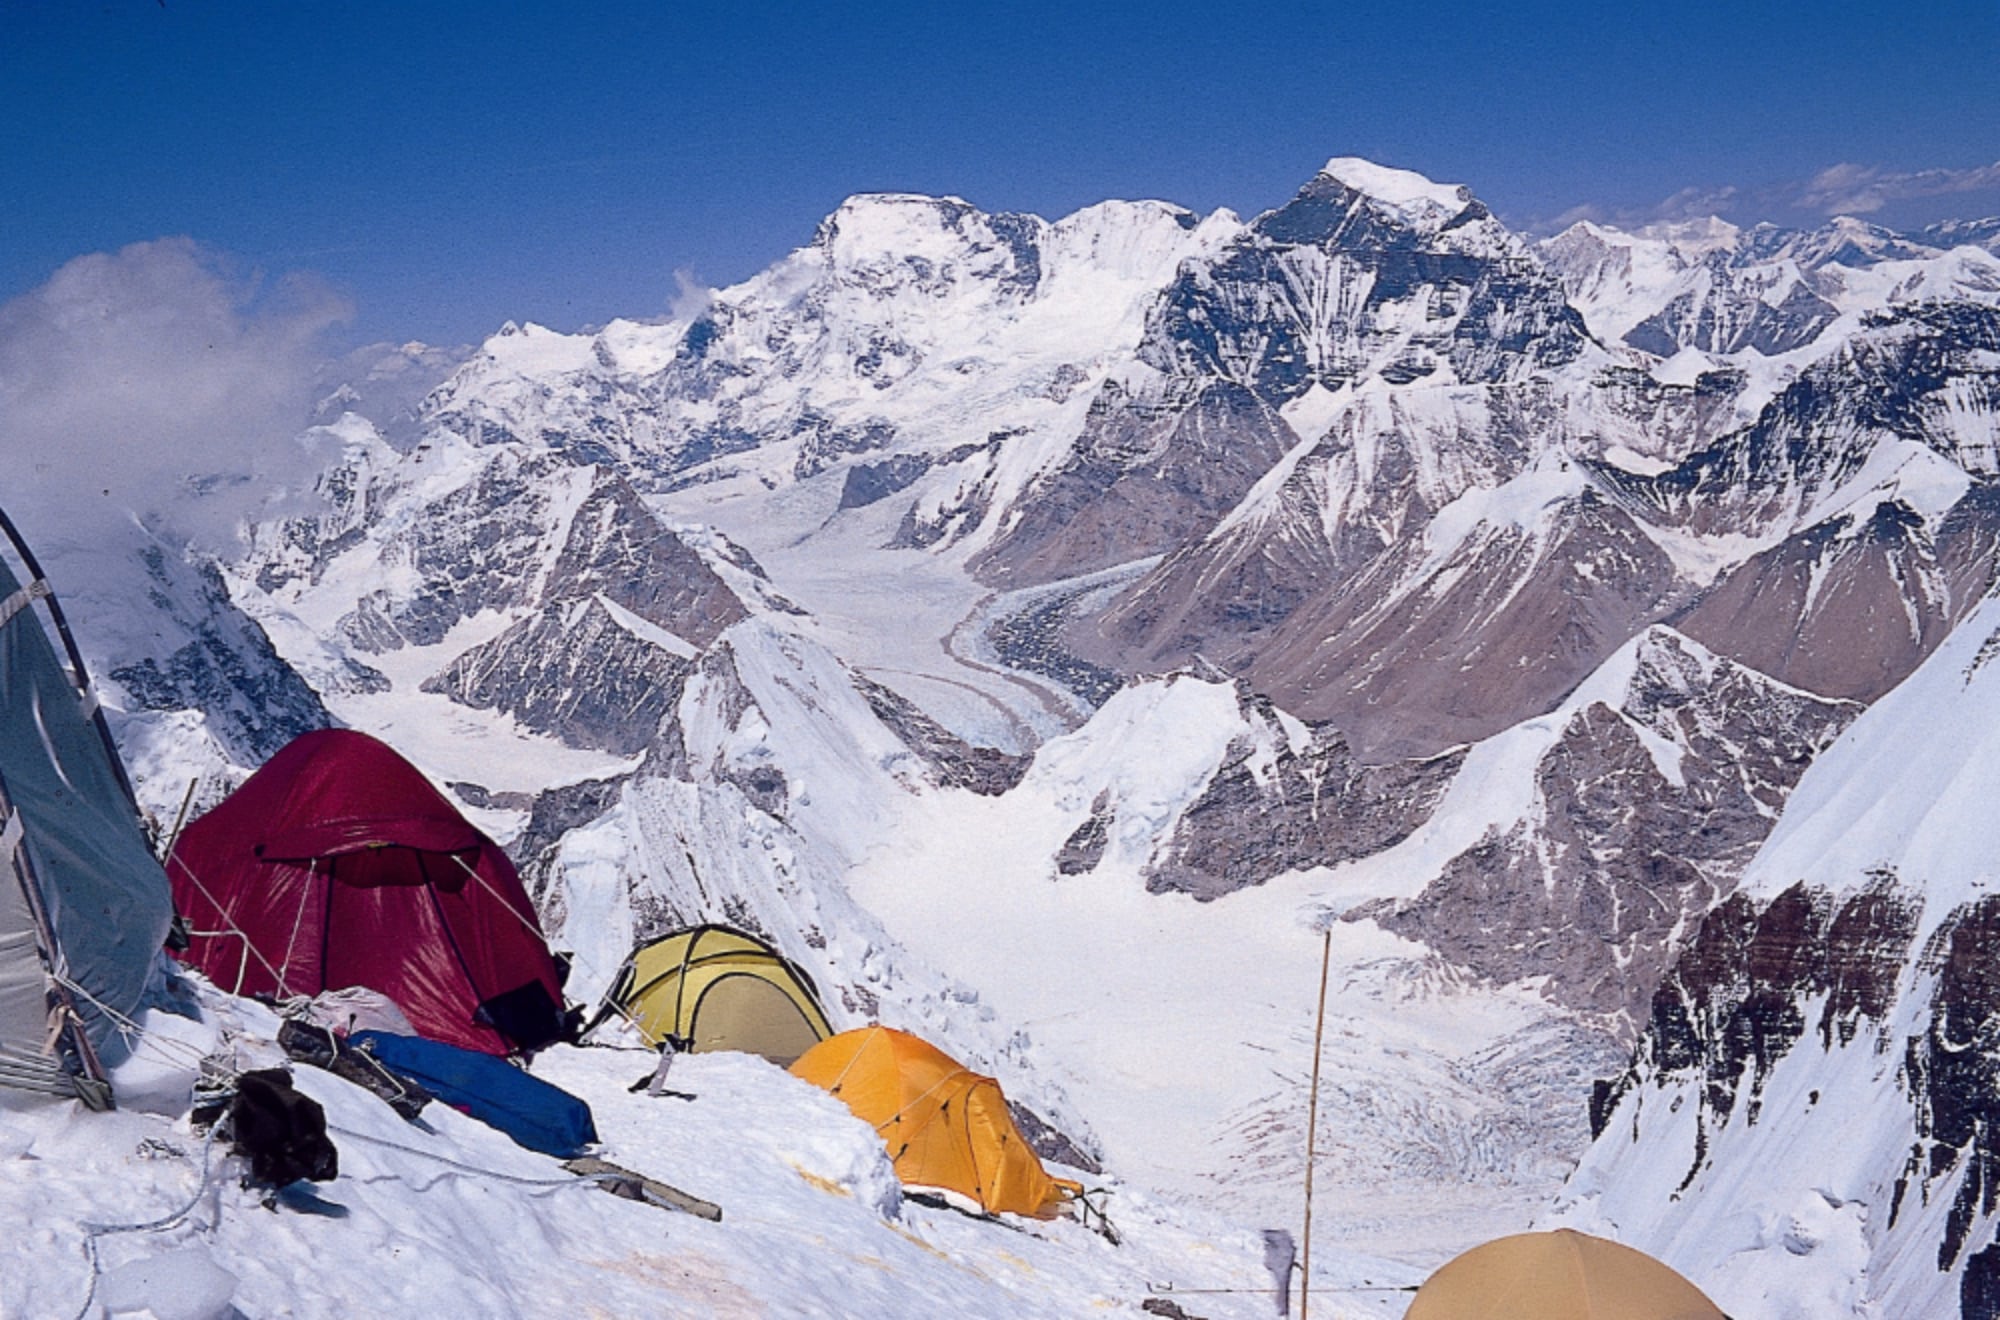 Camp 2 on the North ridge of Everest